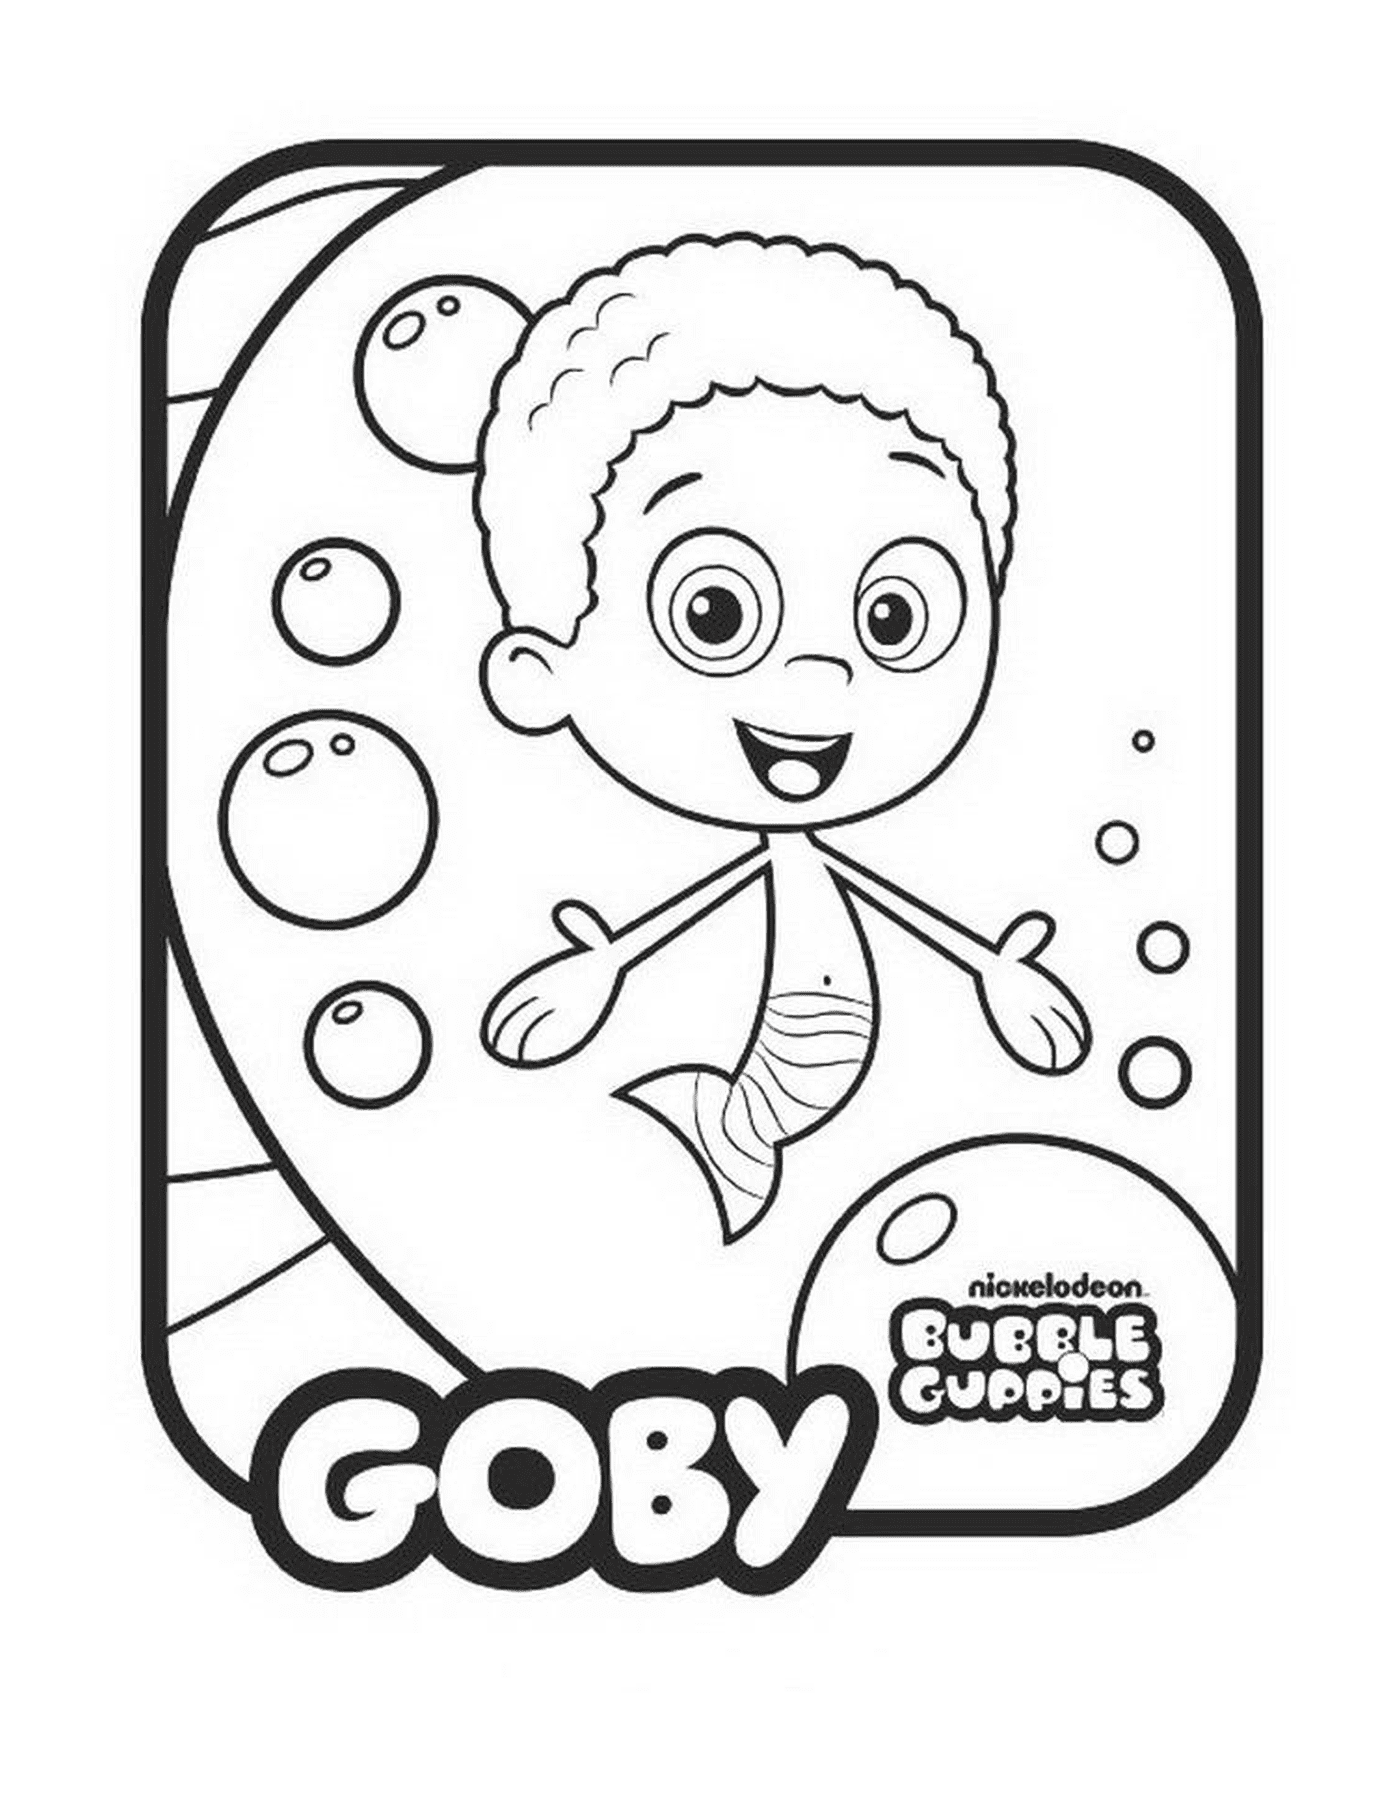  Goby der Bubble Guppies 